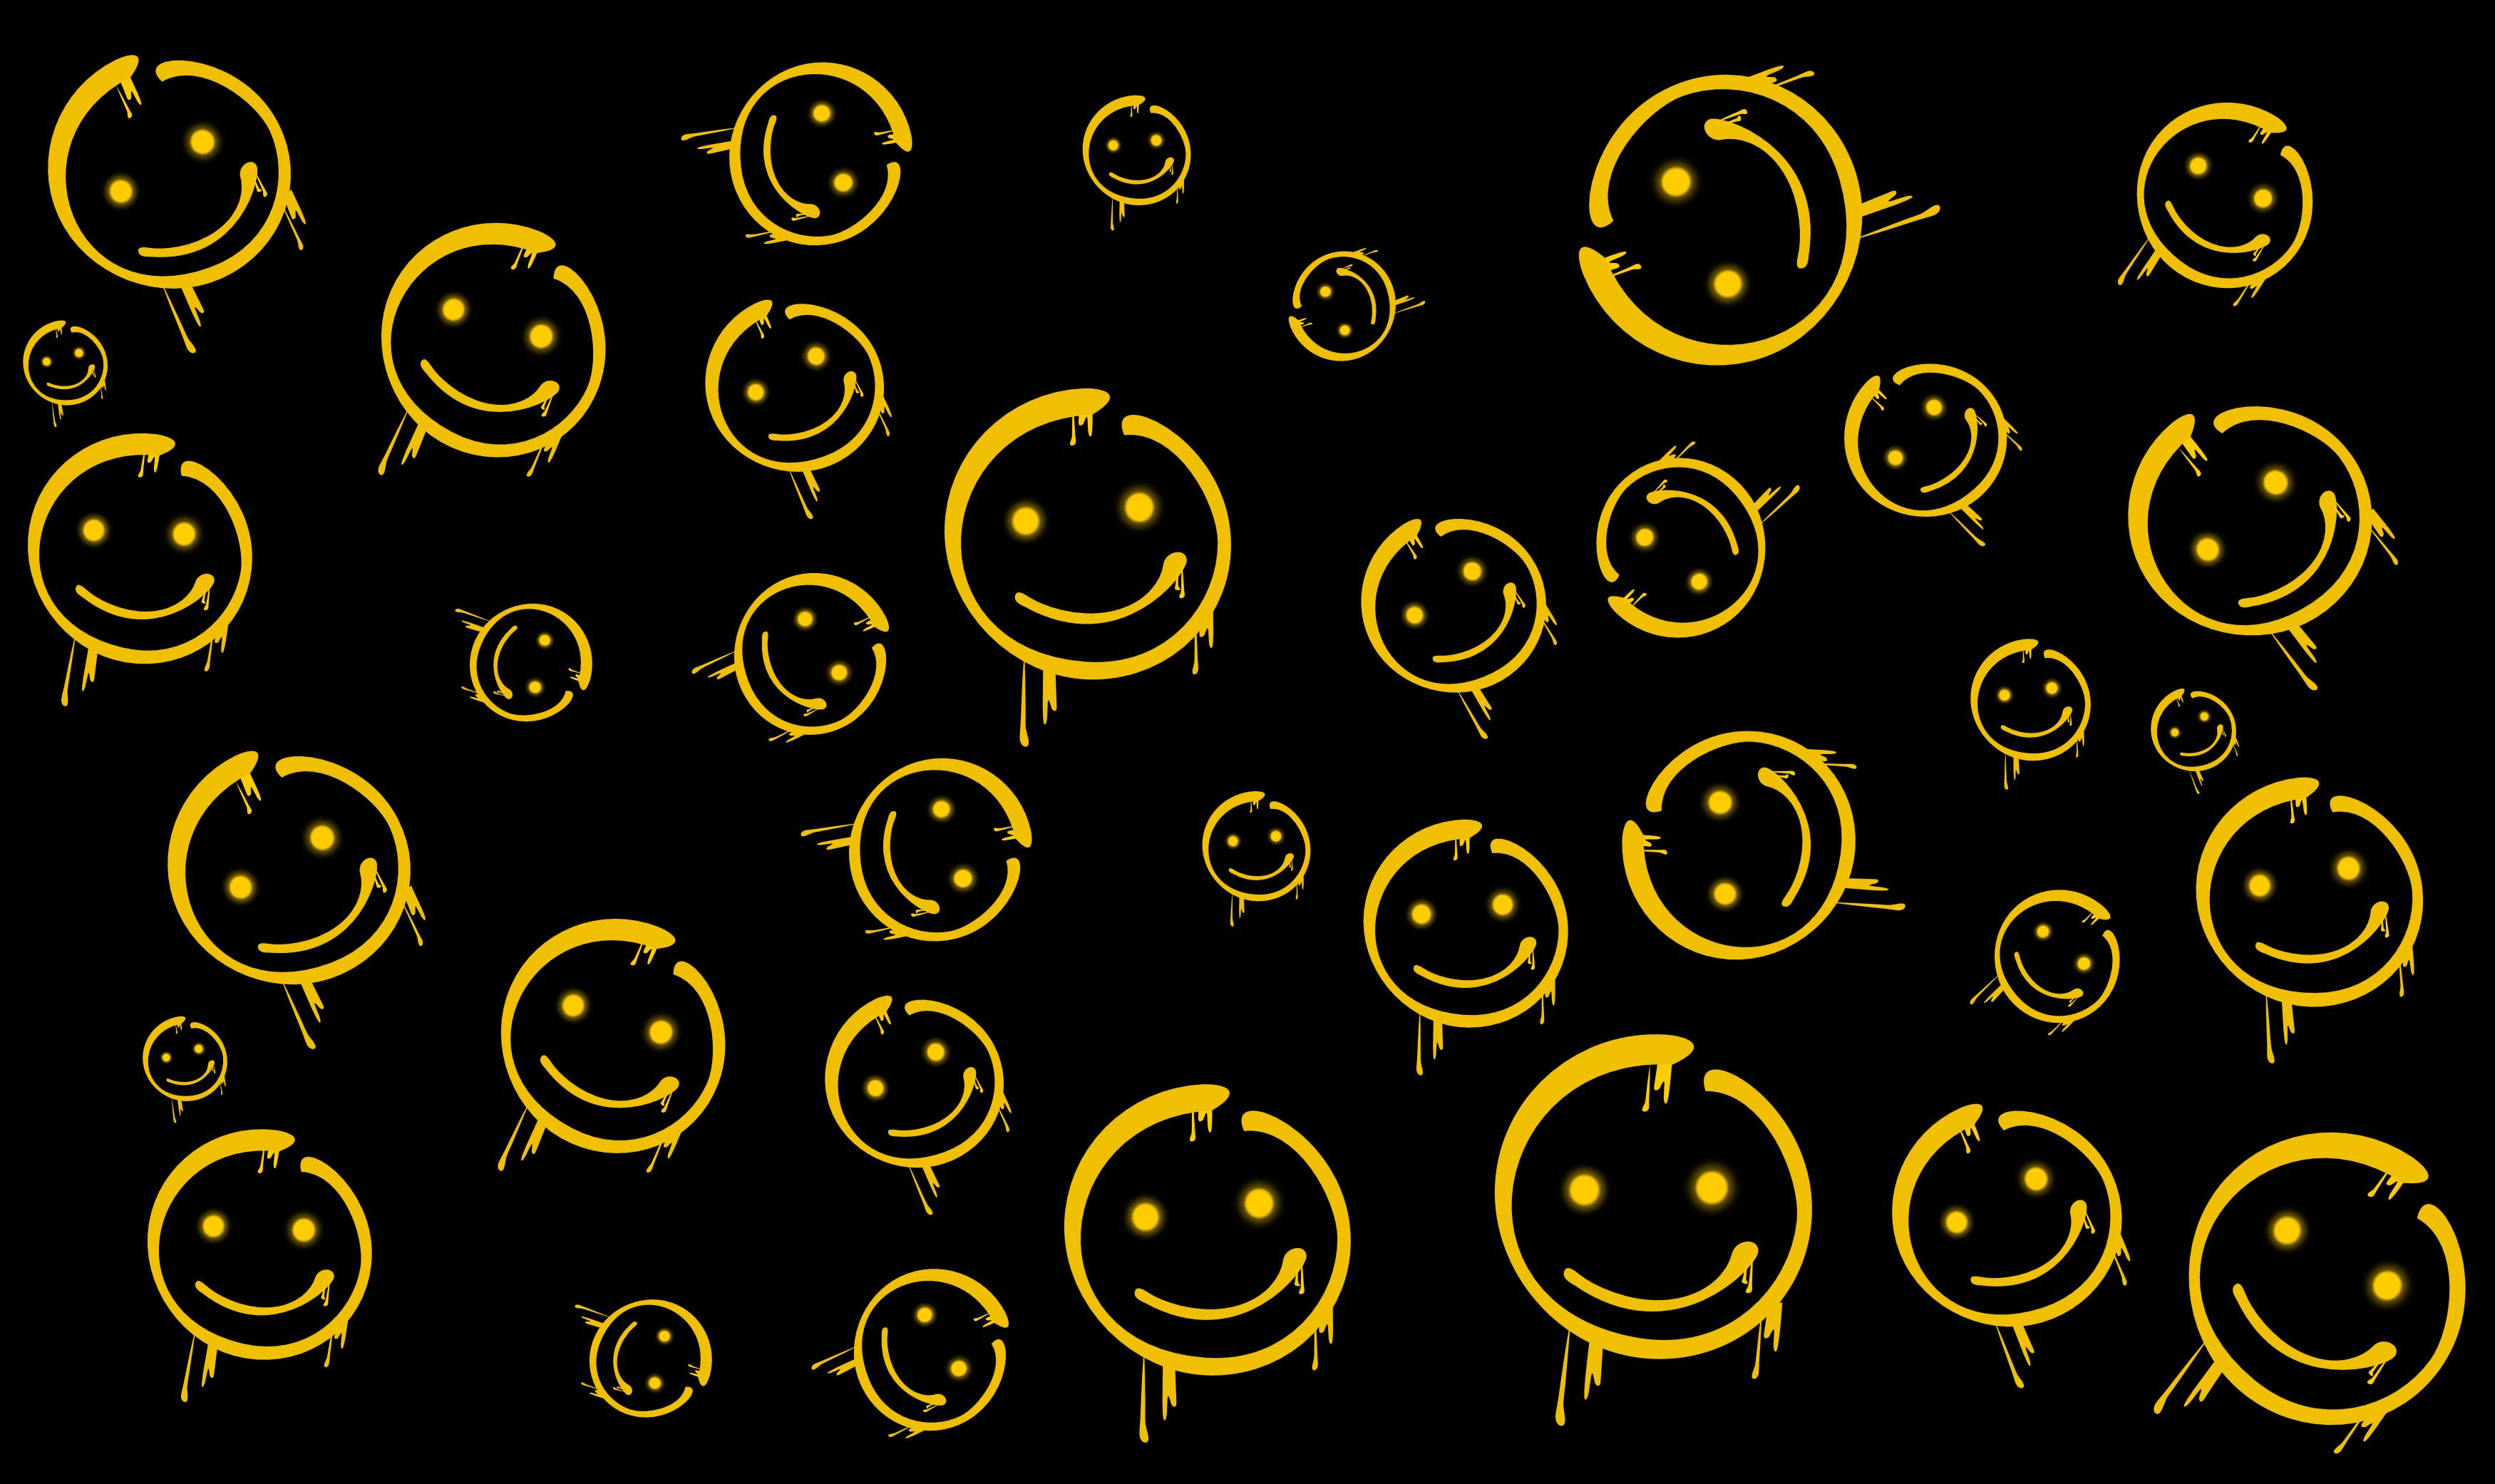 Smiley Face Wallpaper and Background 4K, HD, Dual Screen